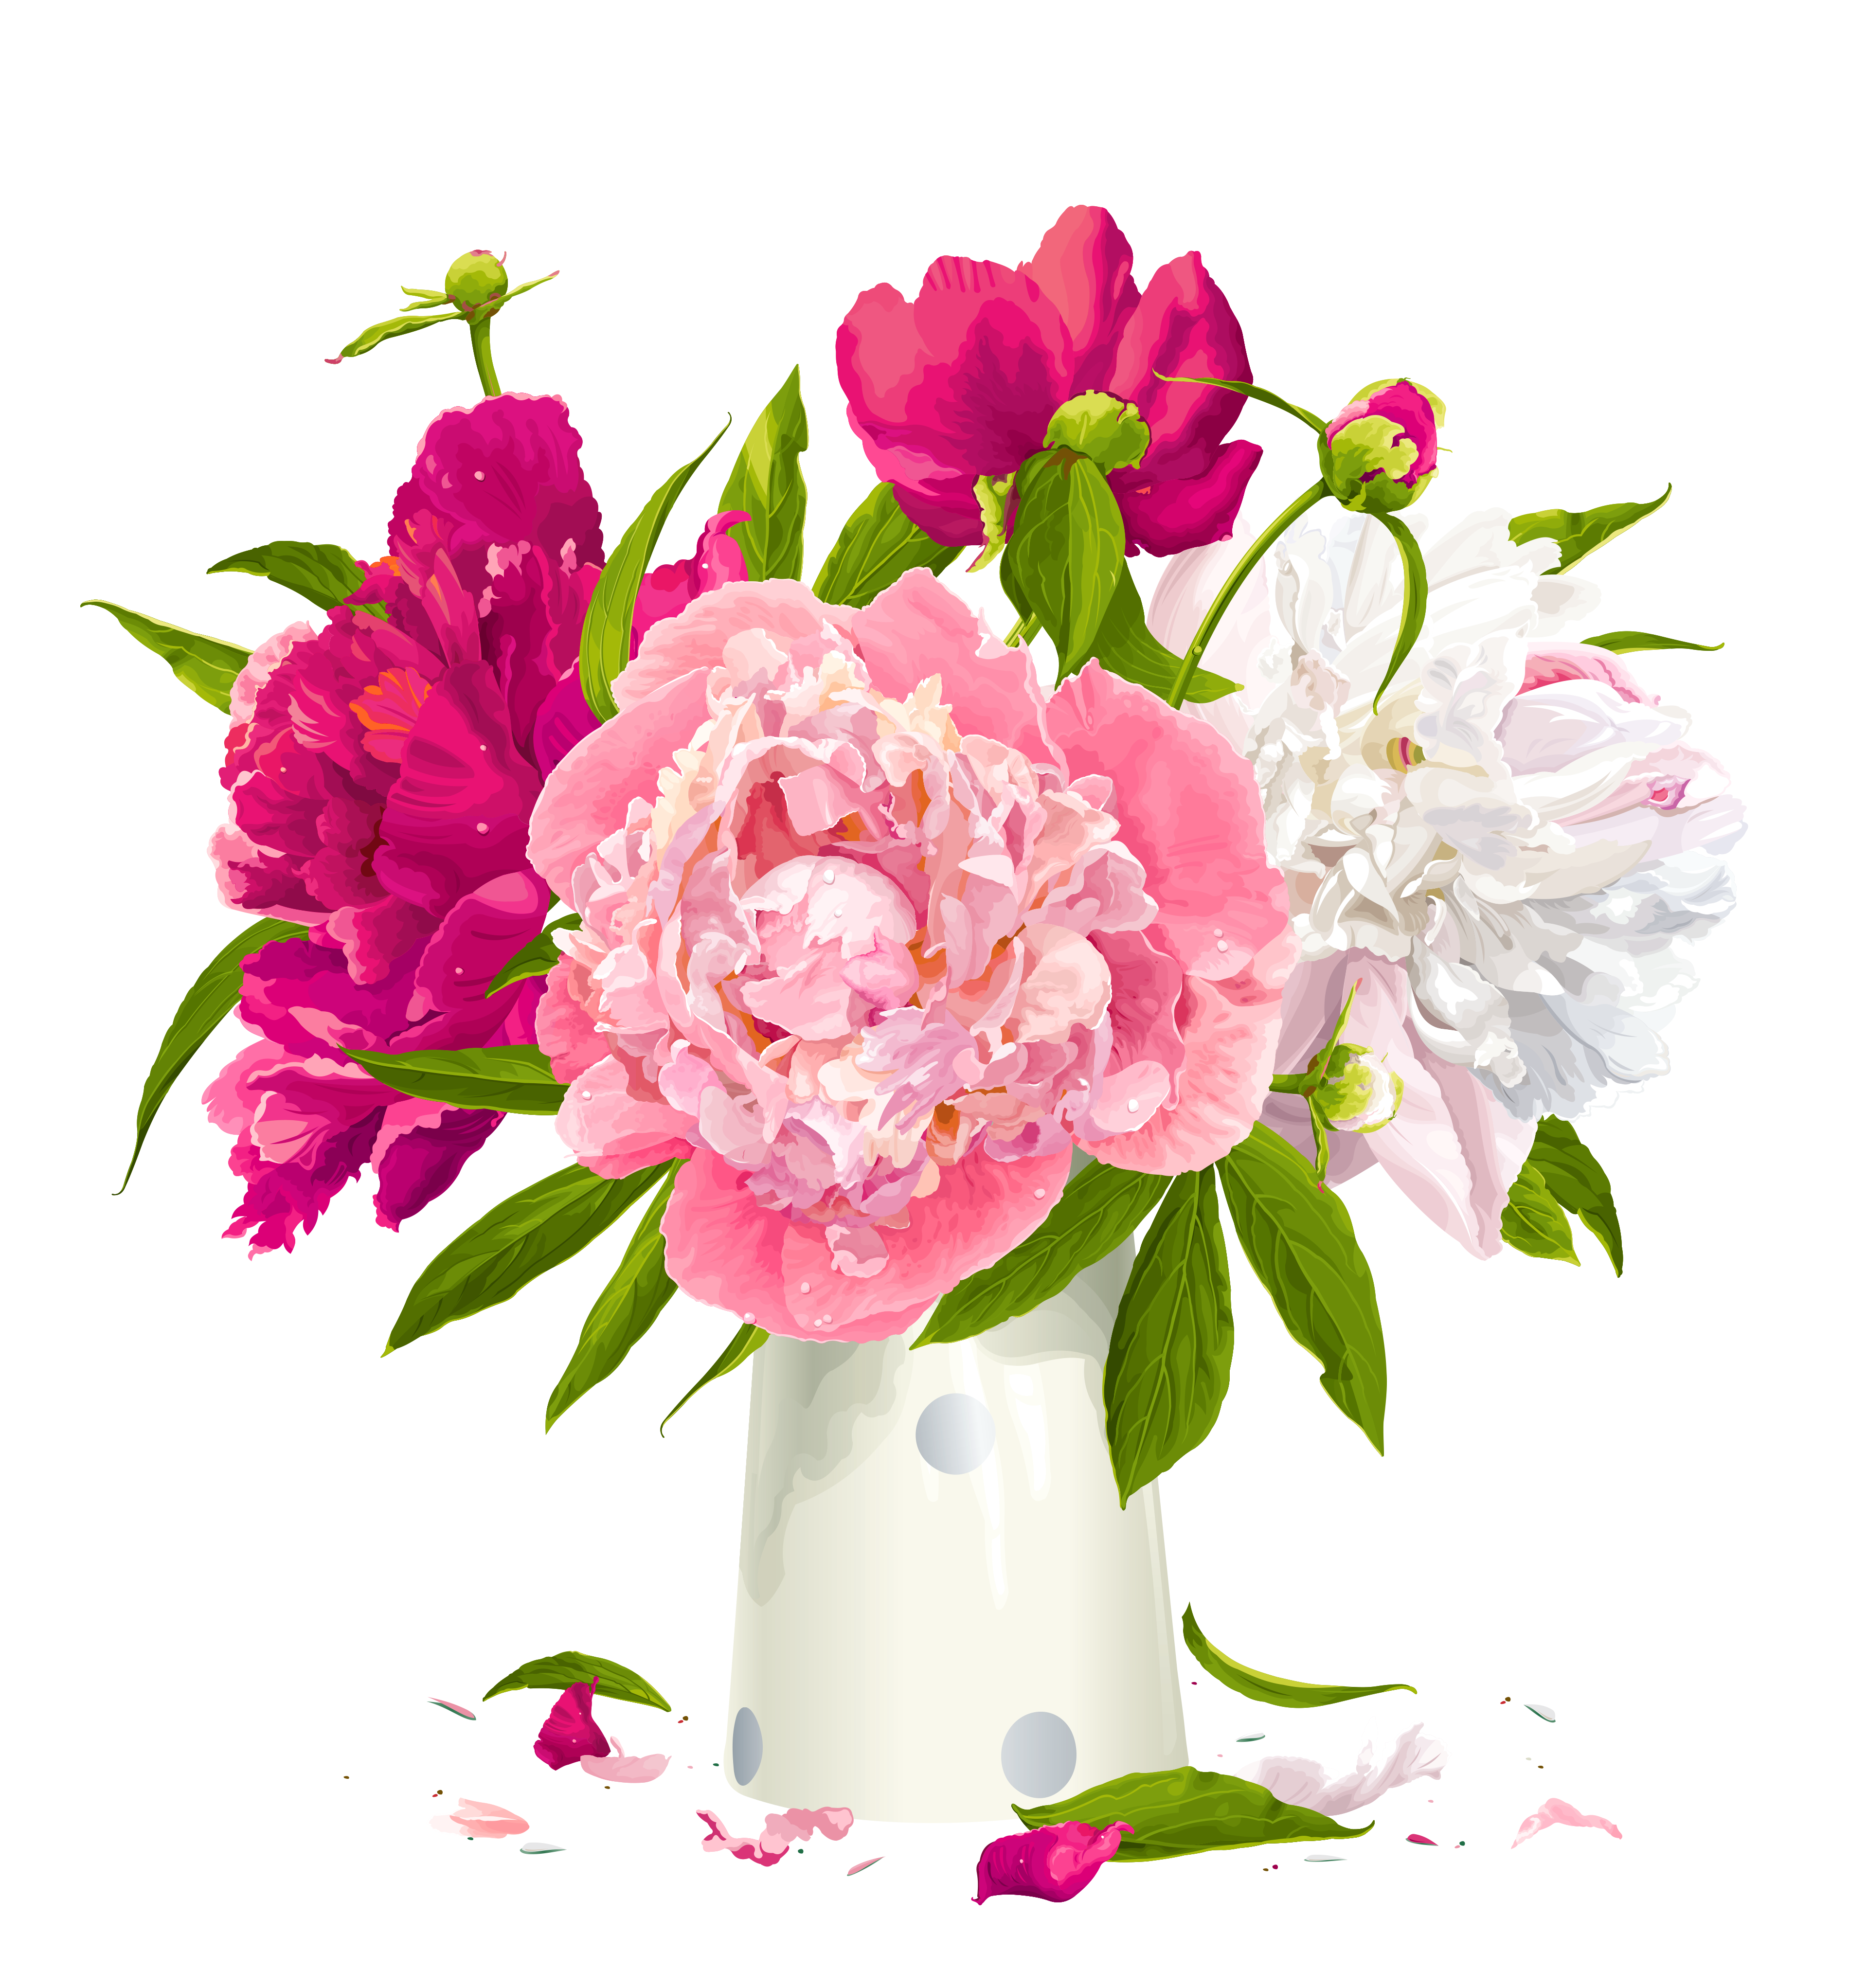 Vase_with_Peonies_Clipart.png?m=1399672800 